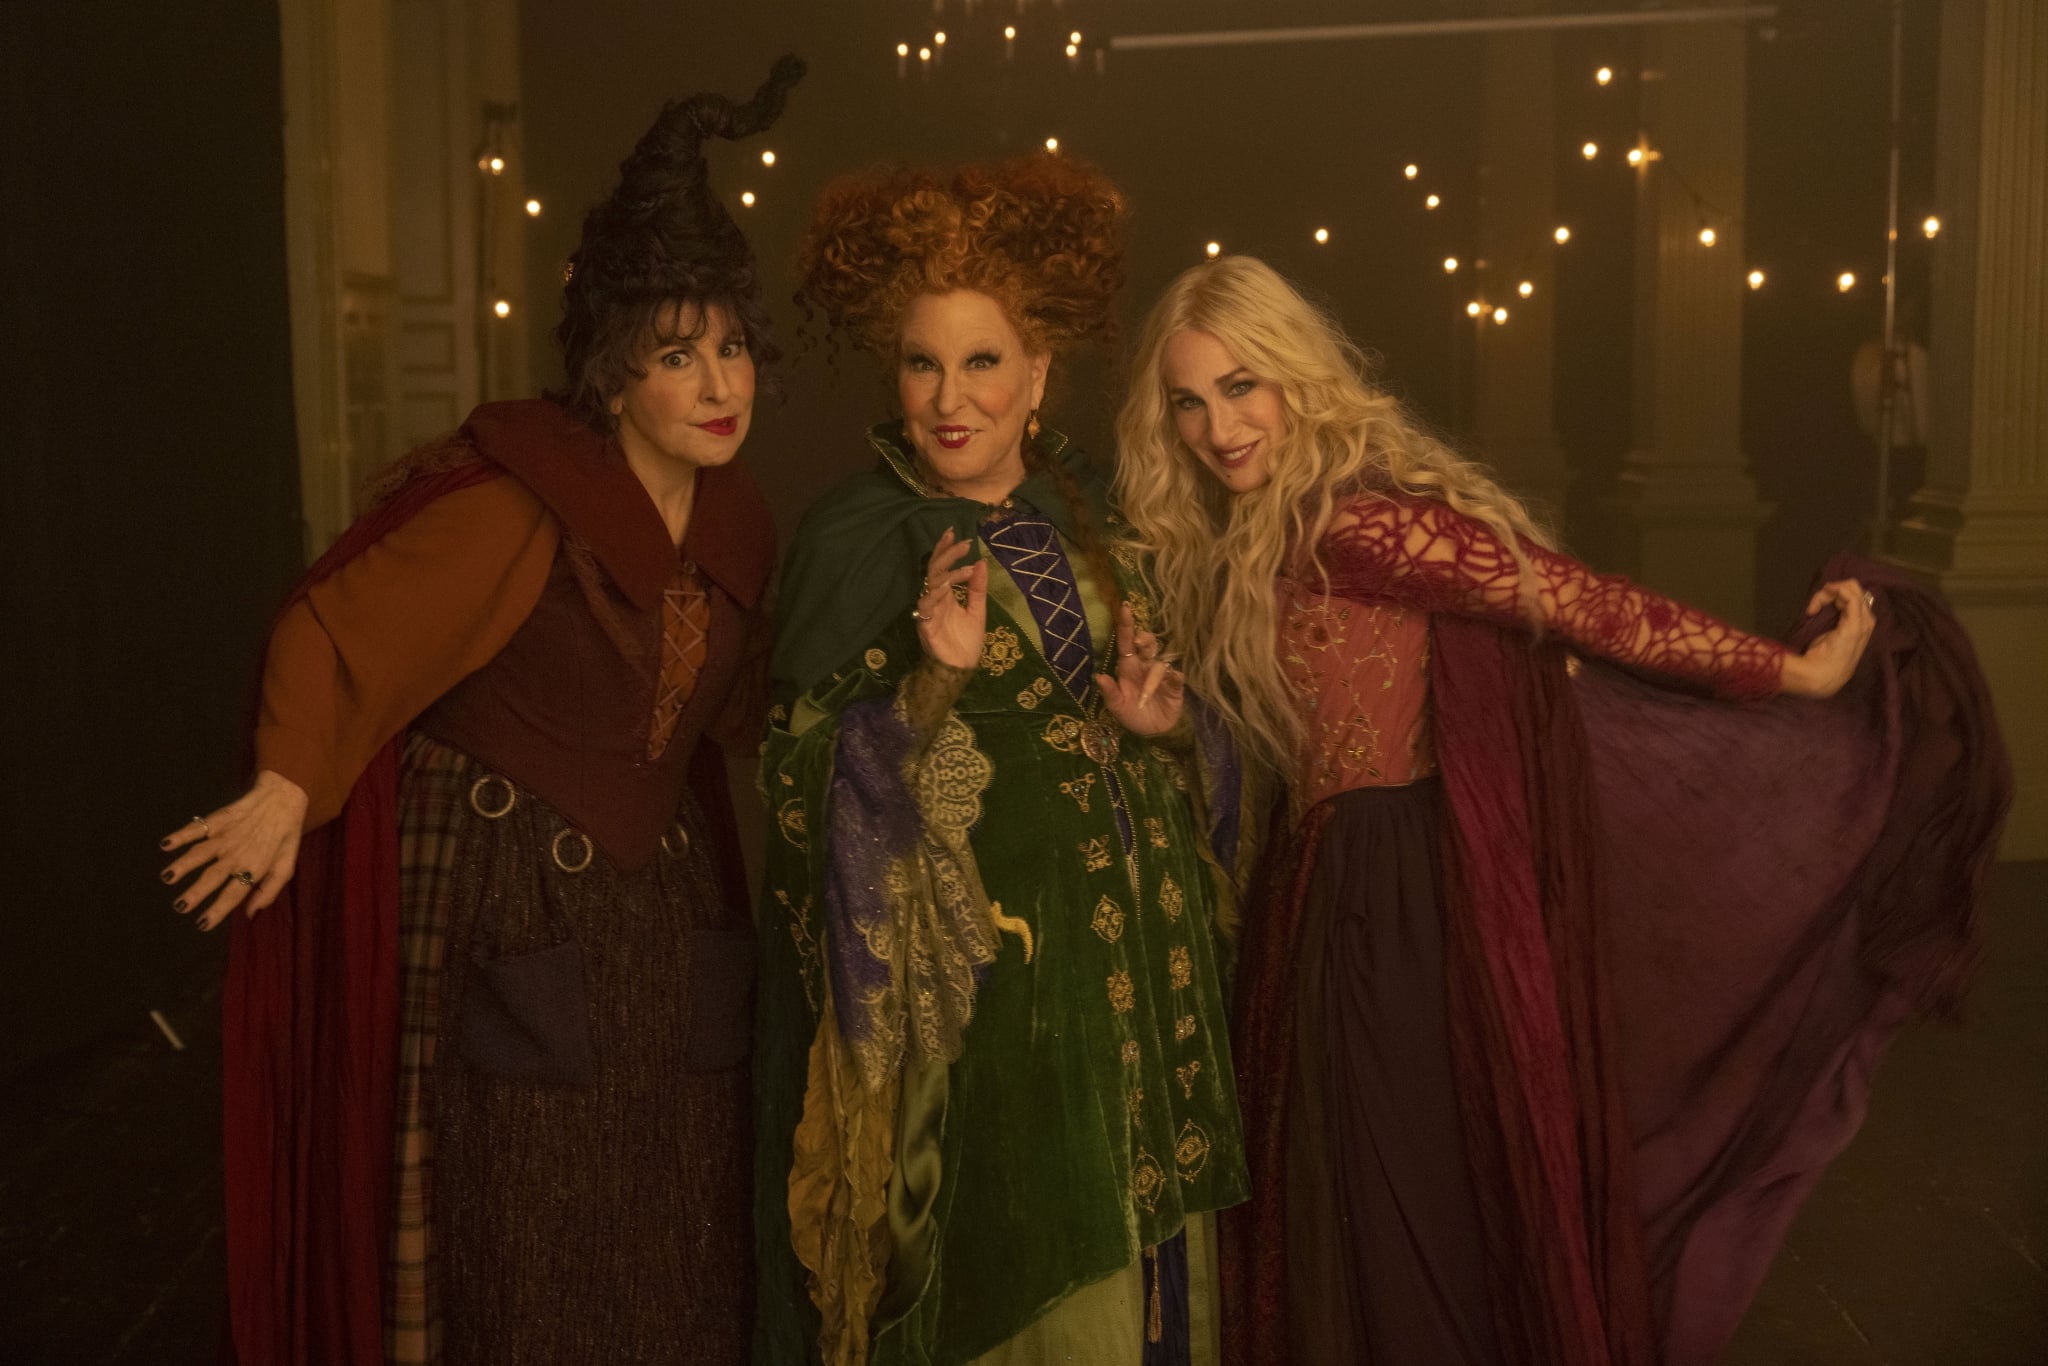 Could There Be a “Hocus Pocus 3”? The Real-Life Sanderson Sisters Addressed the Possibility